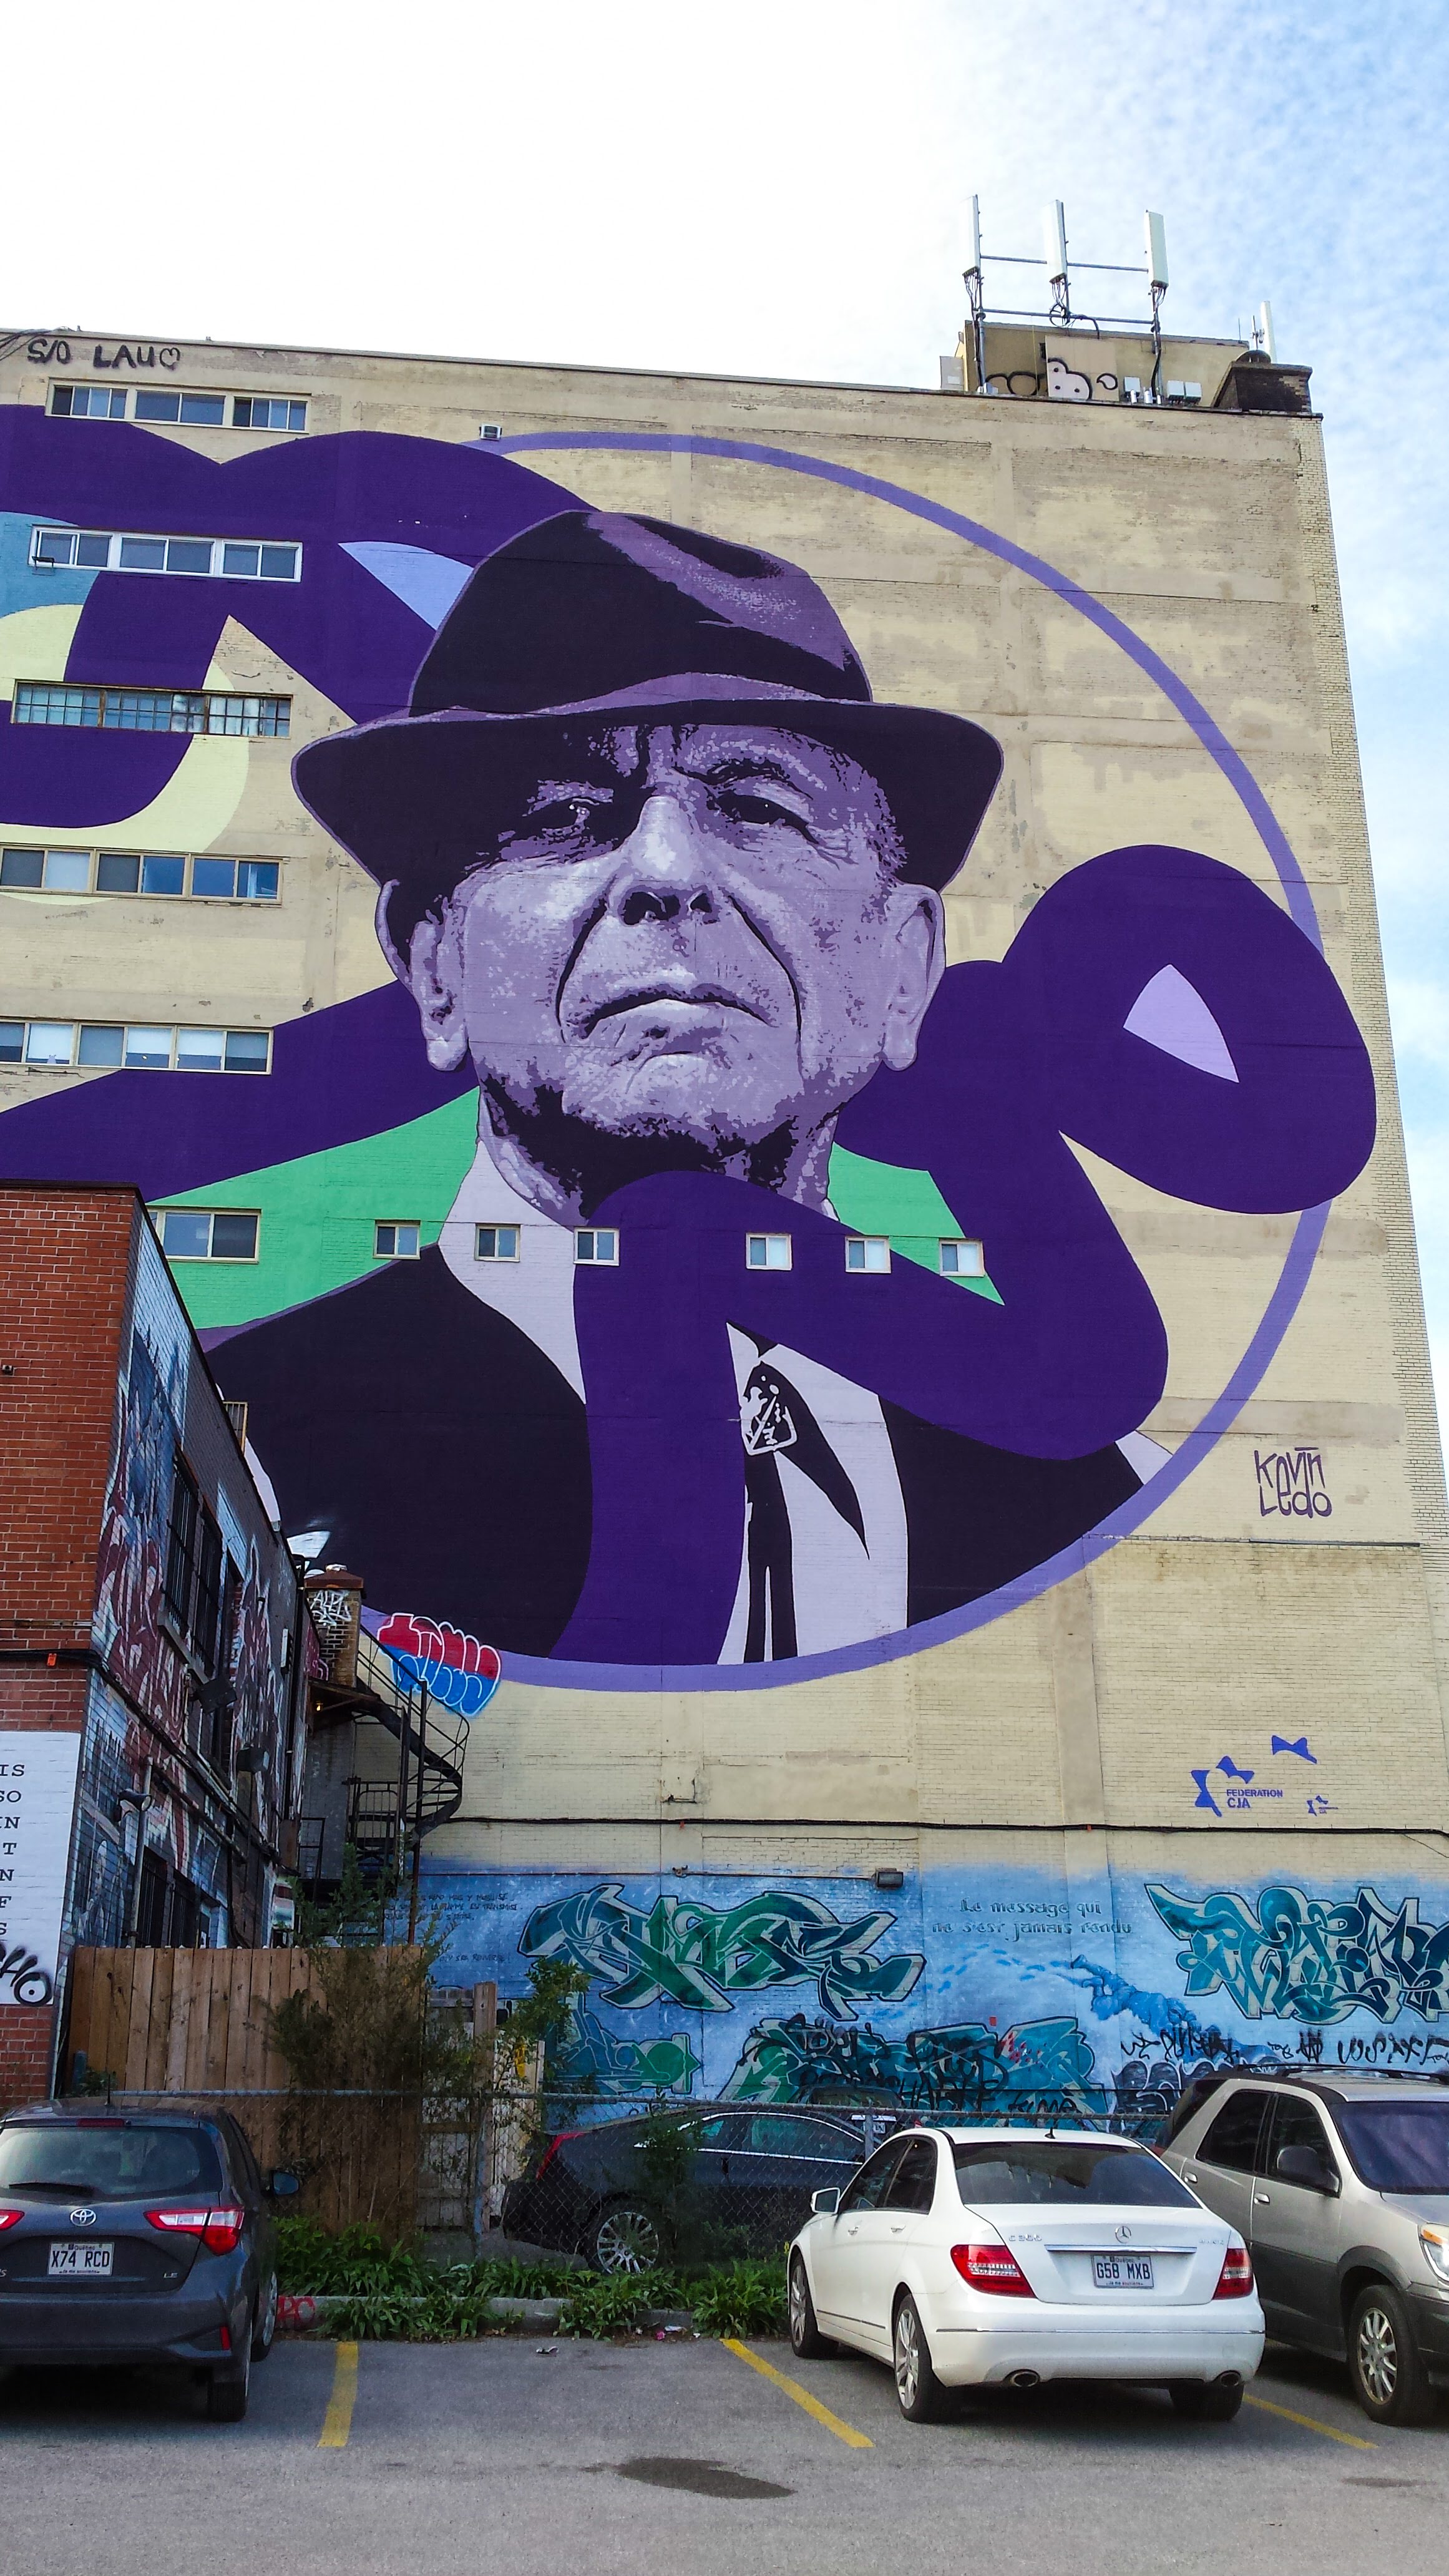 Montreal Canada city guide itinerary travel guide travel tips things to do highlights Mile street art murals Leonard Cohen